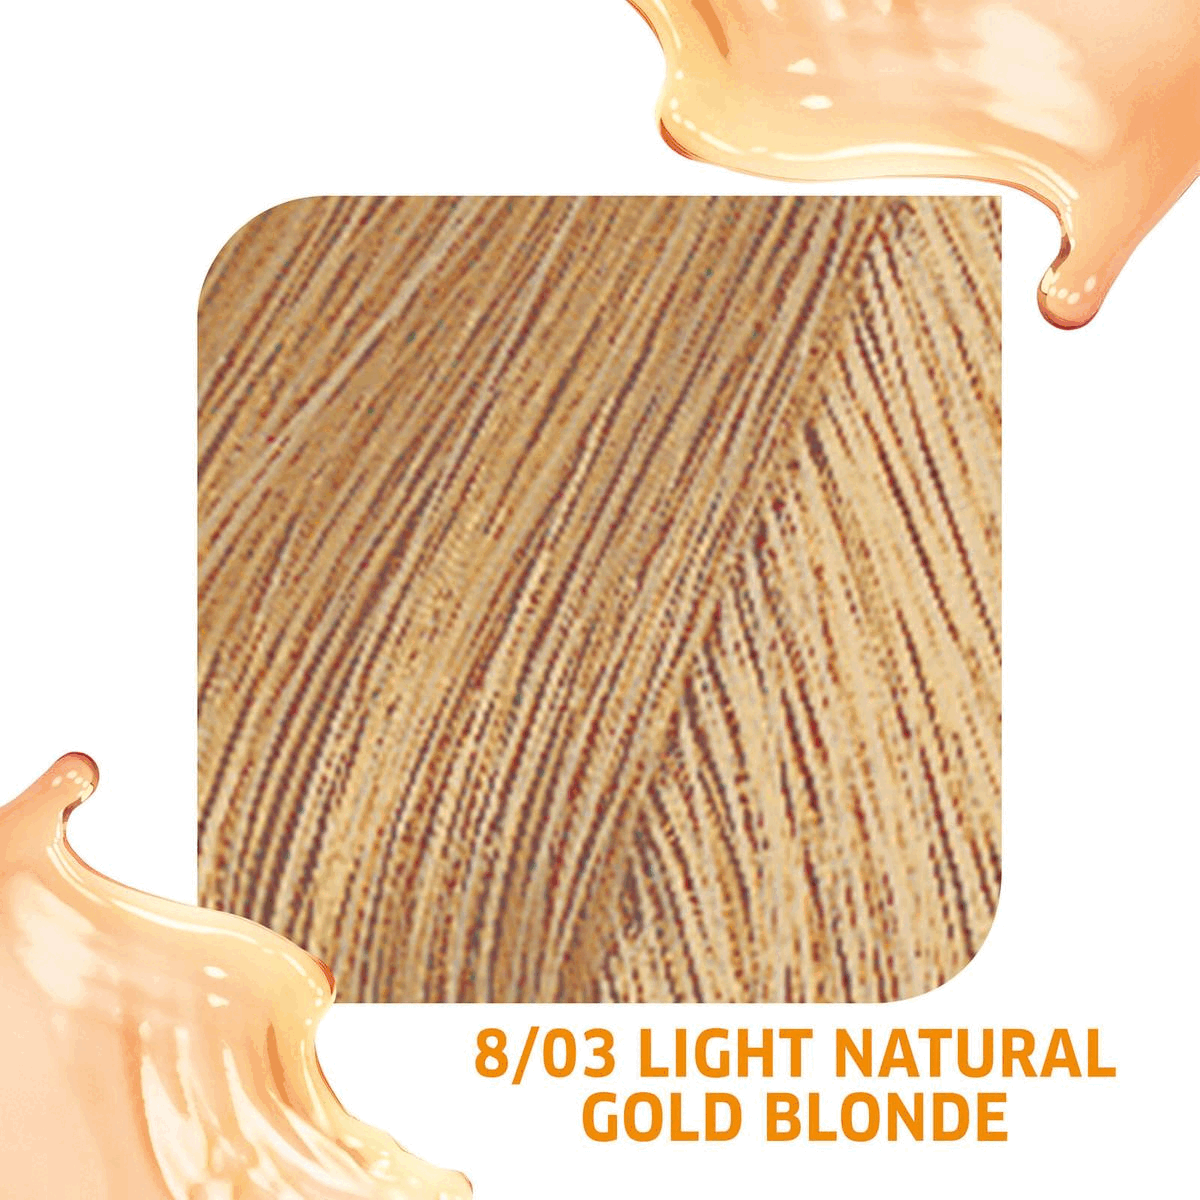 8/03 Light Natural Gold Blonde  Semi-Permenant Colour enhance. Direct Dies and Vitamin Care Complex. Lasts Up to 10 Shampoos. Colour, depth and tone. Quick and Easy Application  